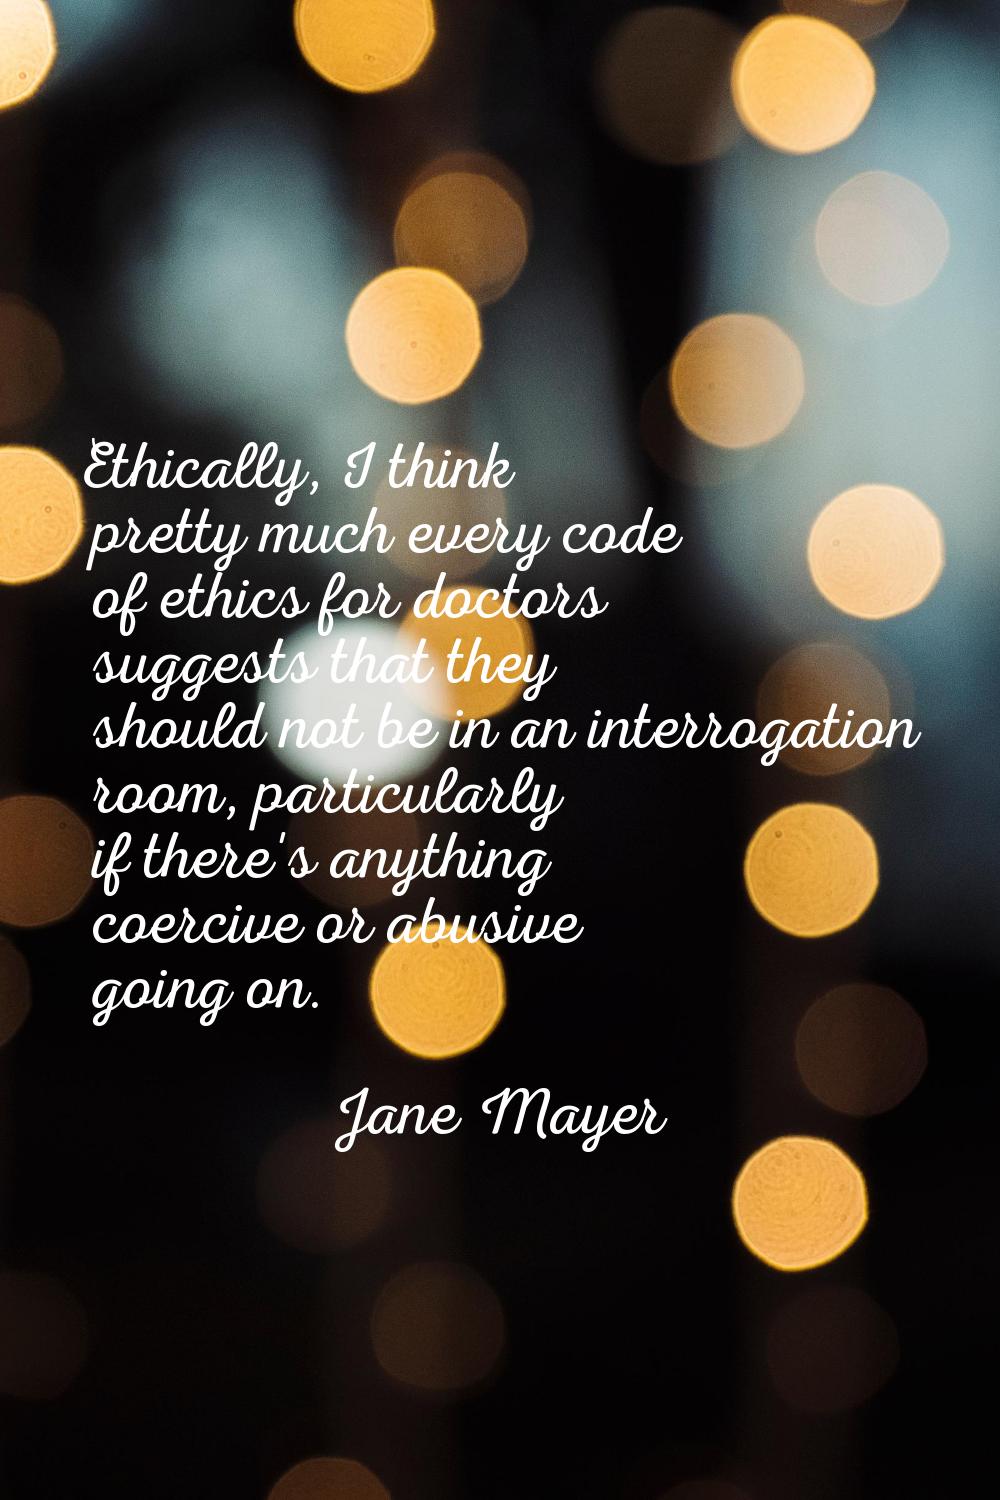 Ethically, I think pretty much every code of ethics for doctors suggests that they should not be in